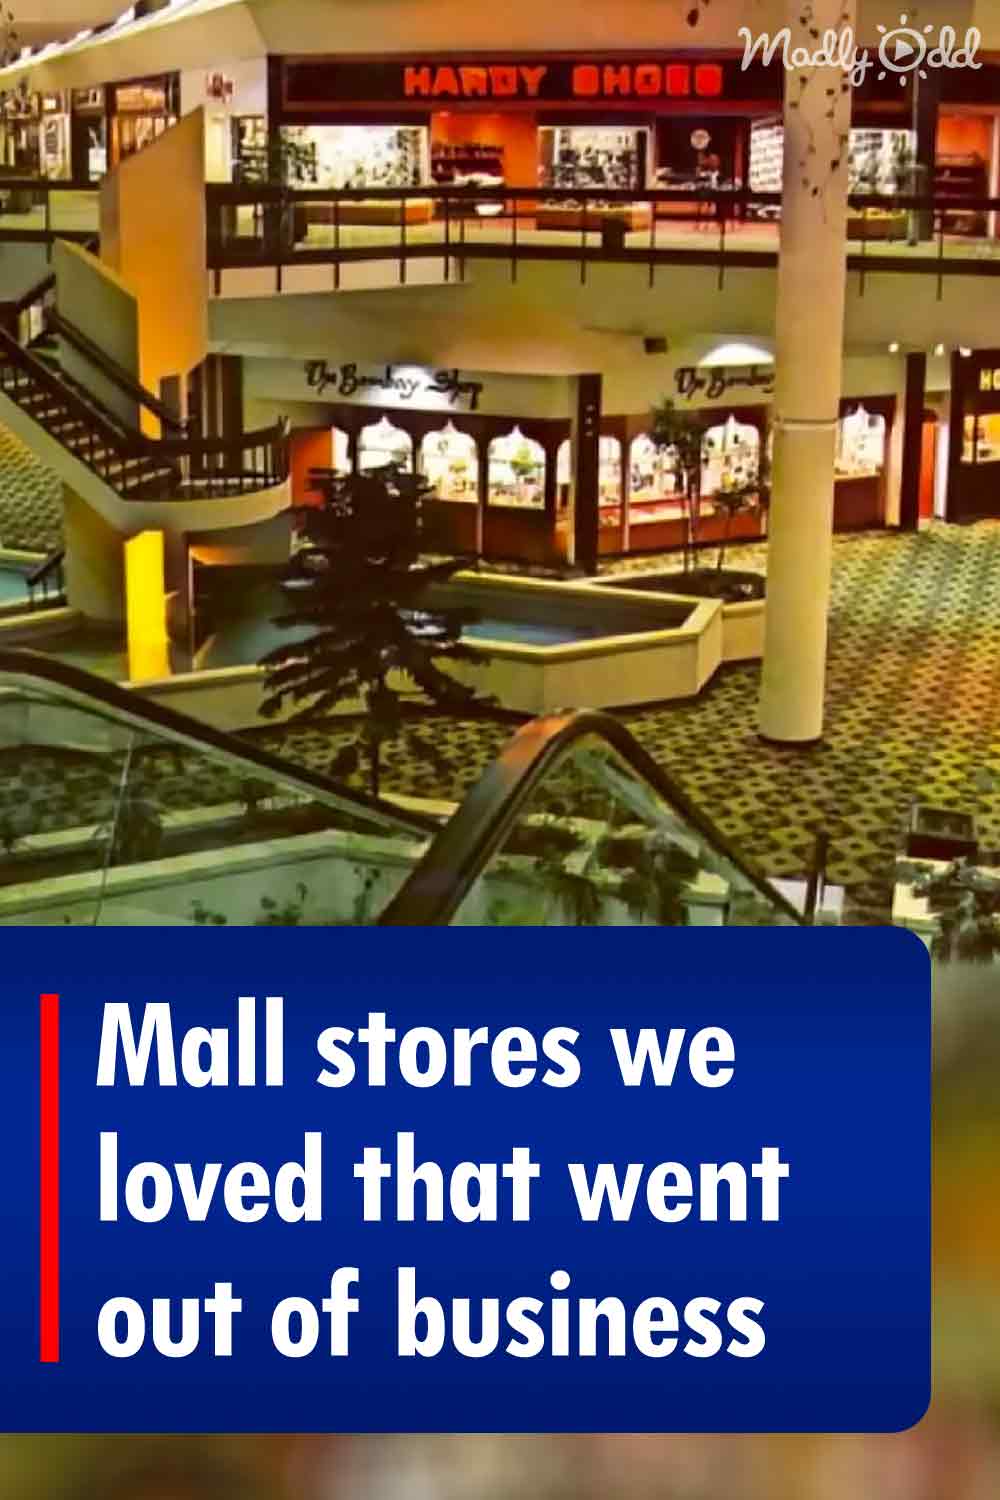 Mall stores we loved that went out of business